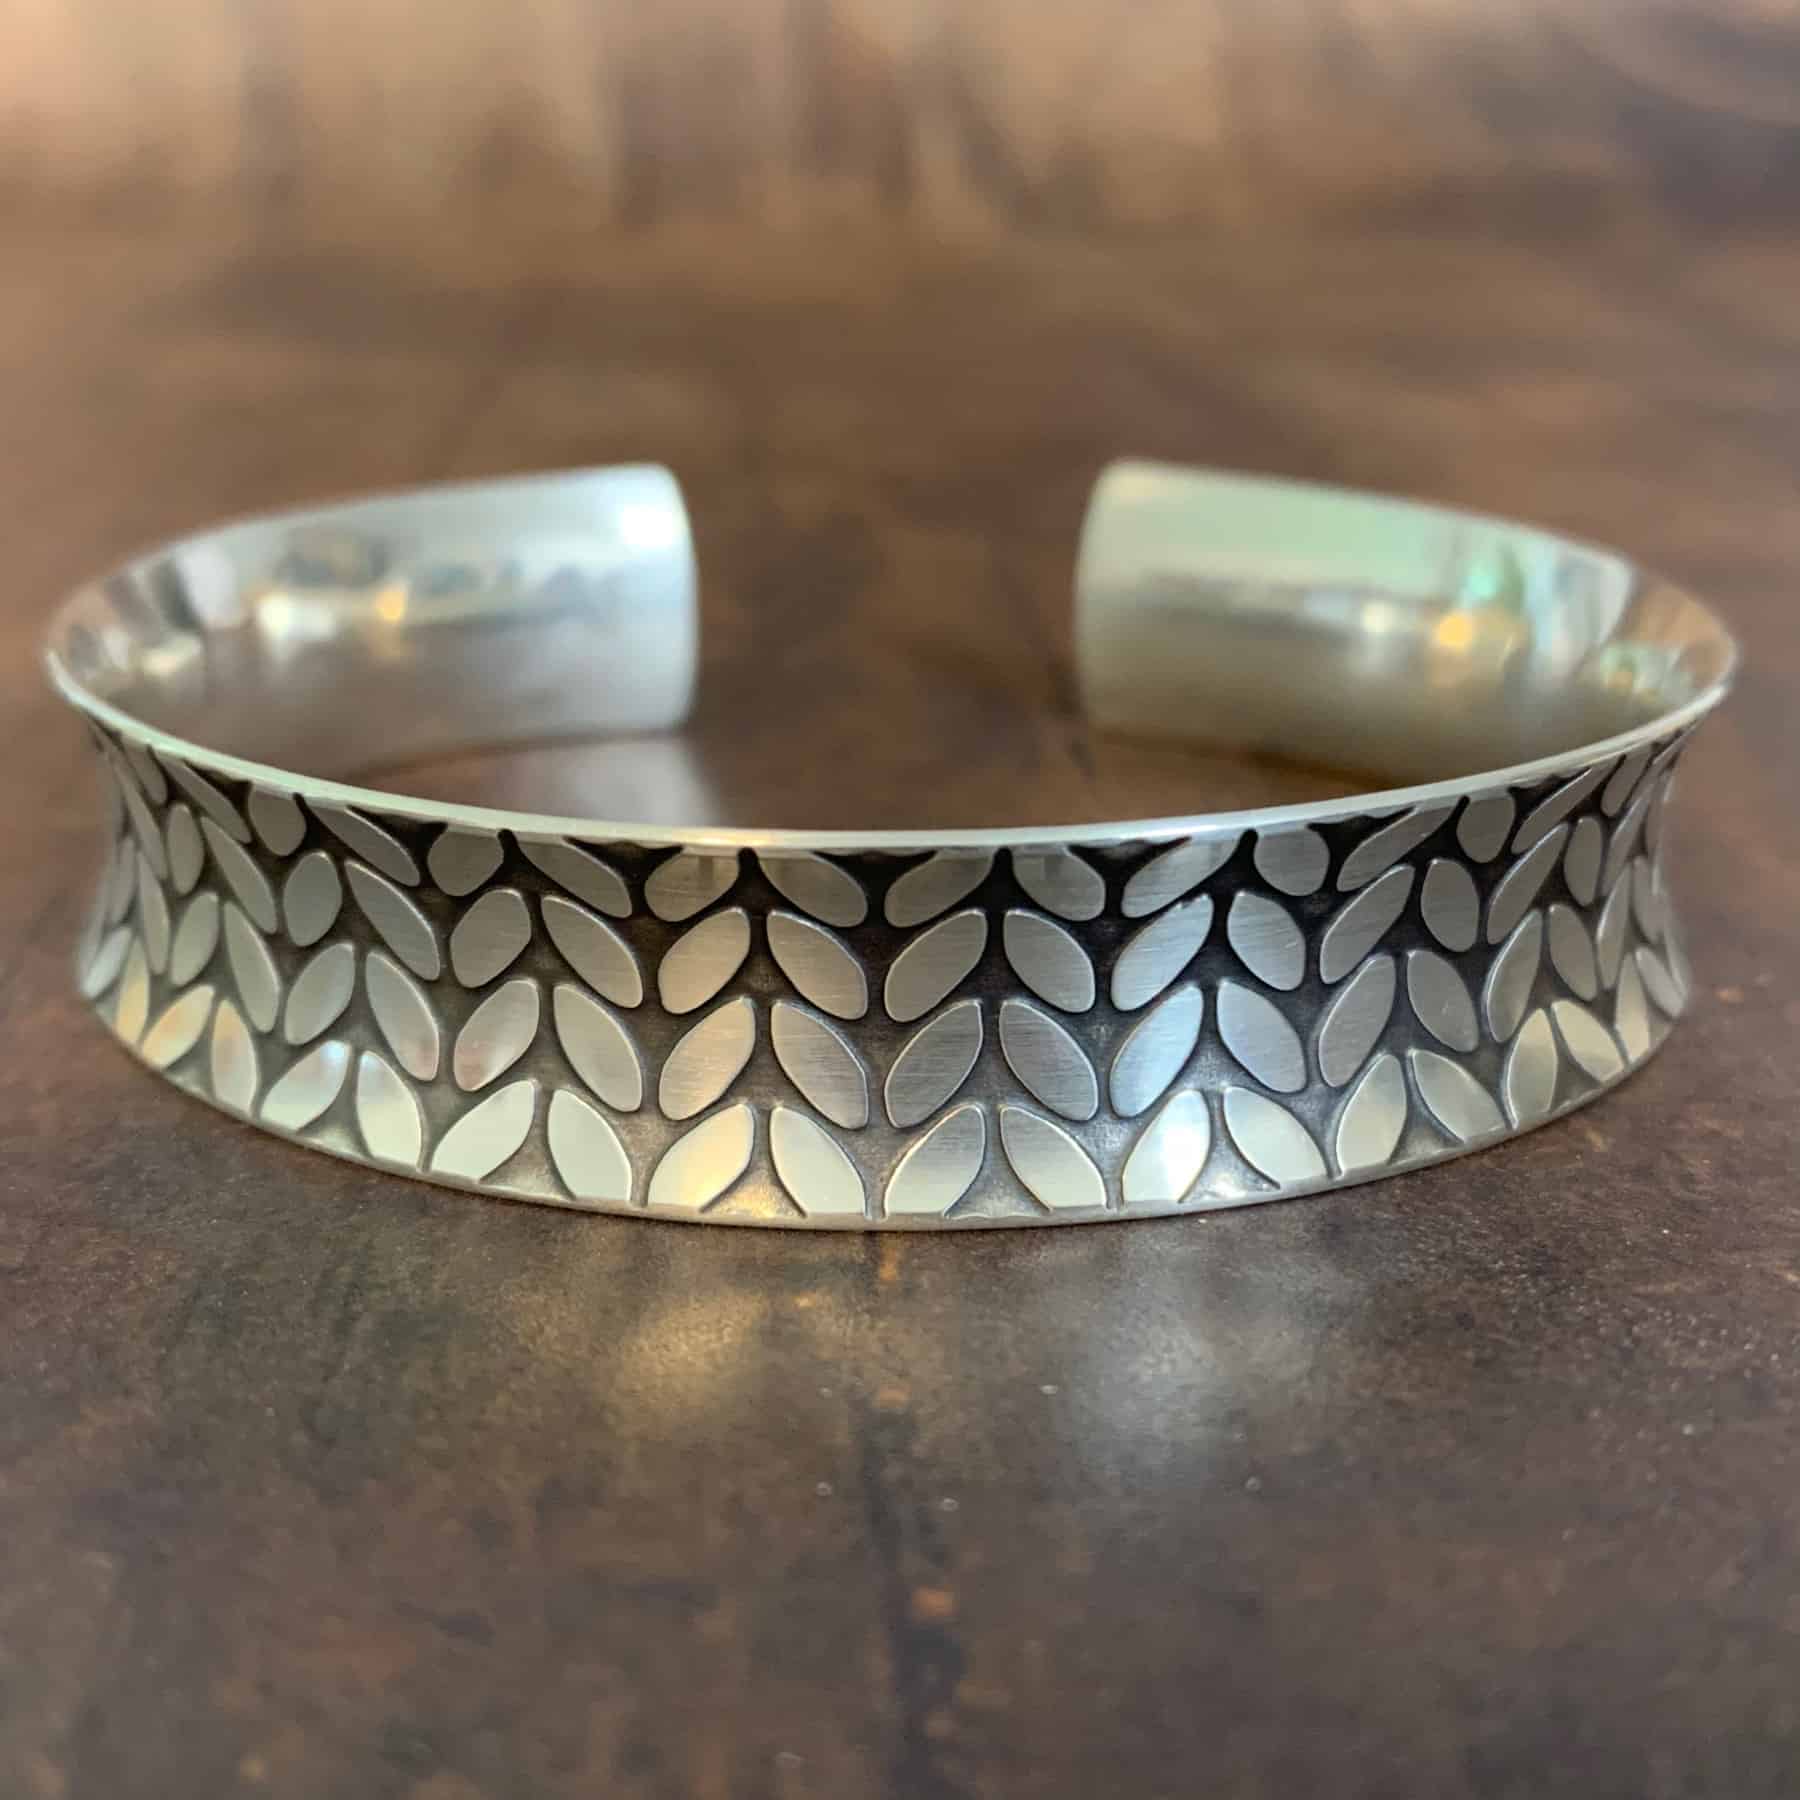 A silver bracelet with stockinette stitches etched into it. 